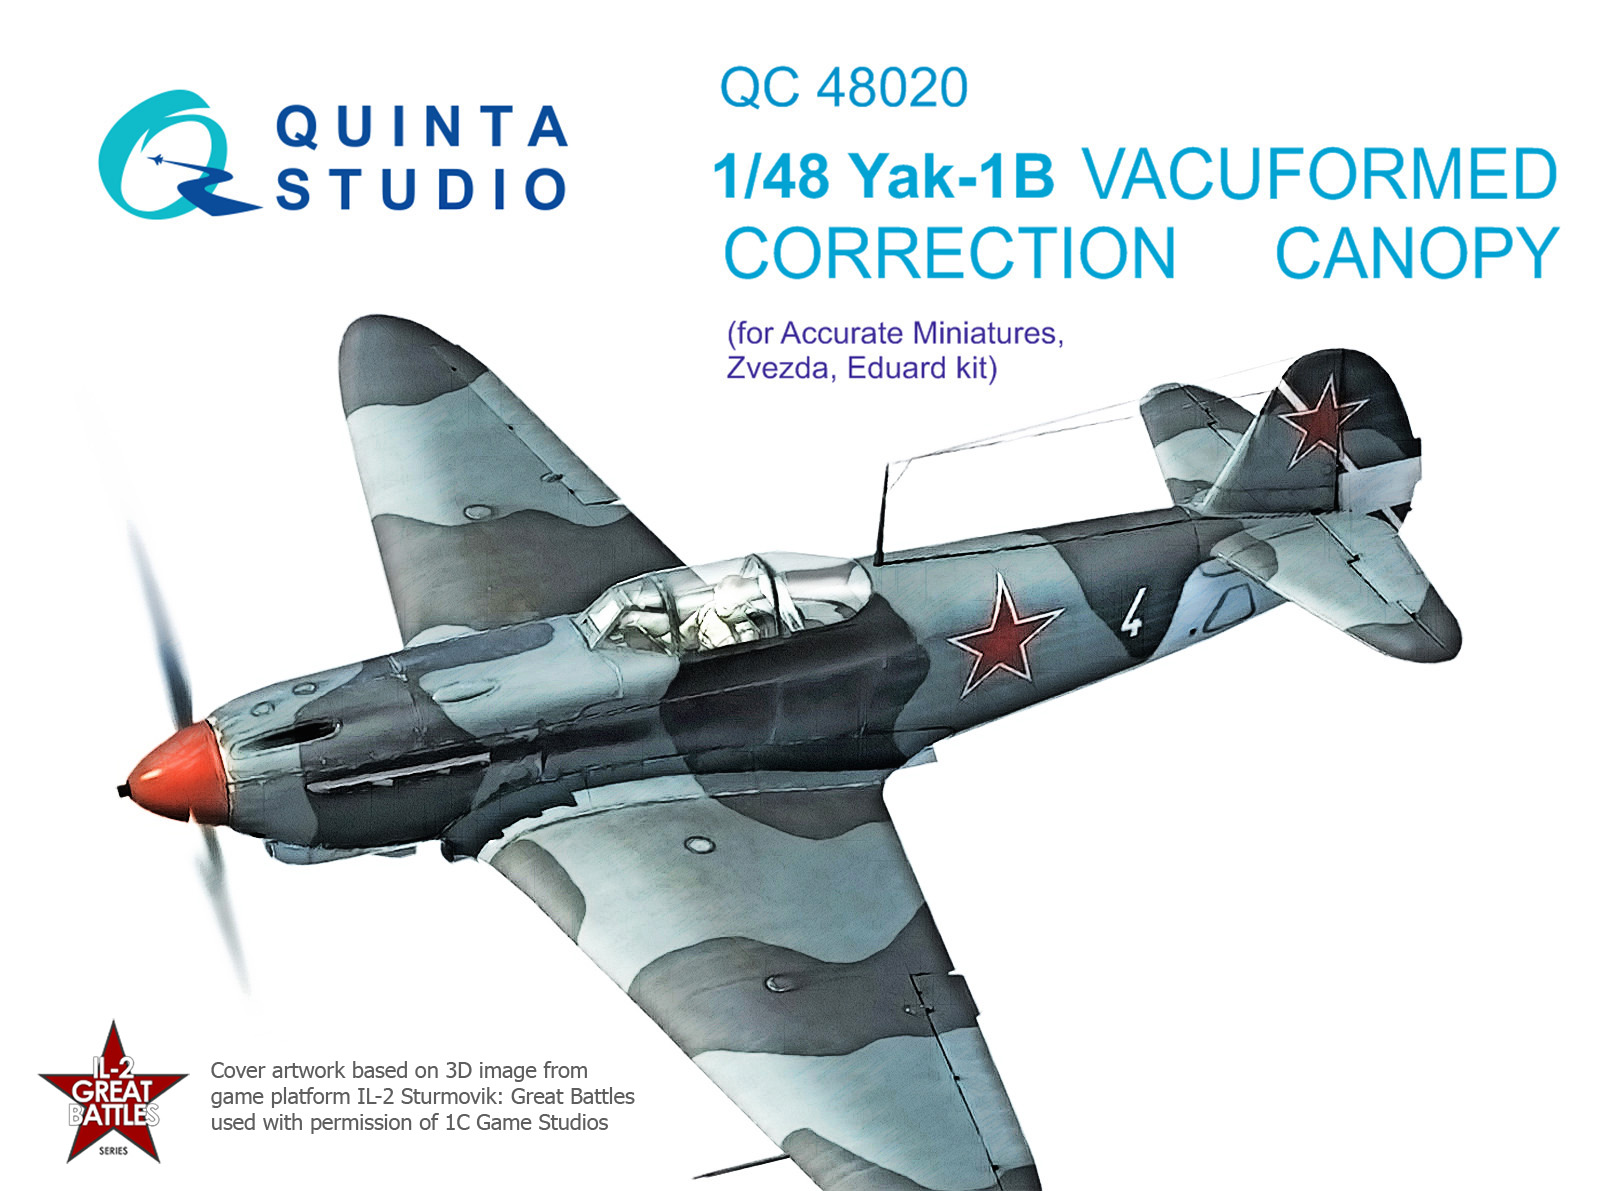 Yak-1B correction vacuuformed clear canopy, 1 pcs, (for Accurate miniatures/Zvezda/Eduard kit)